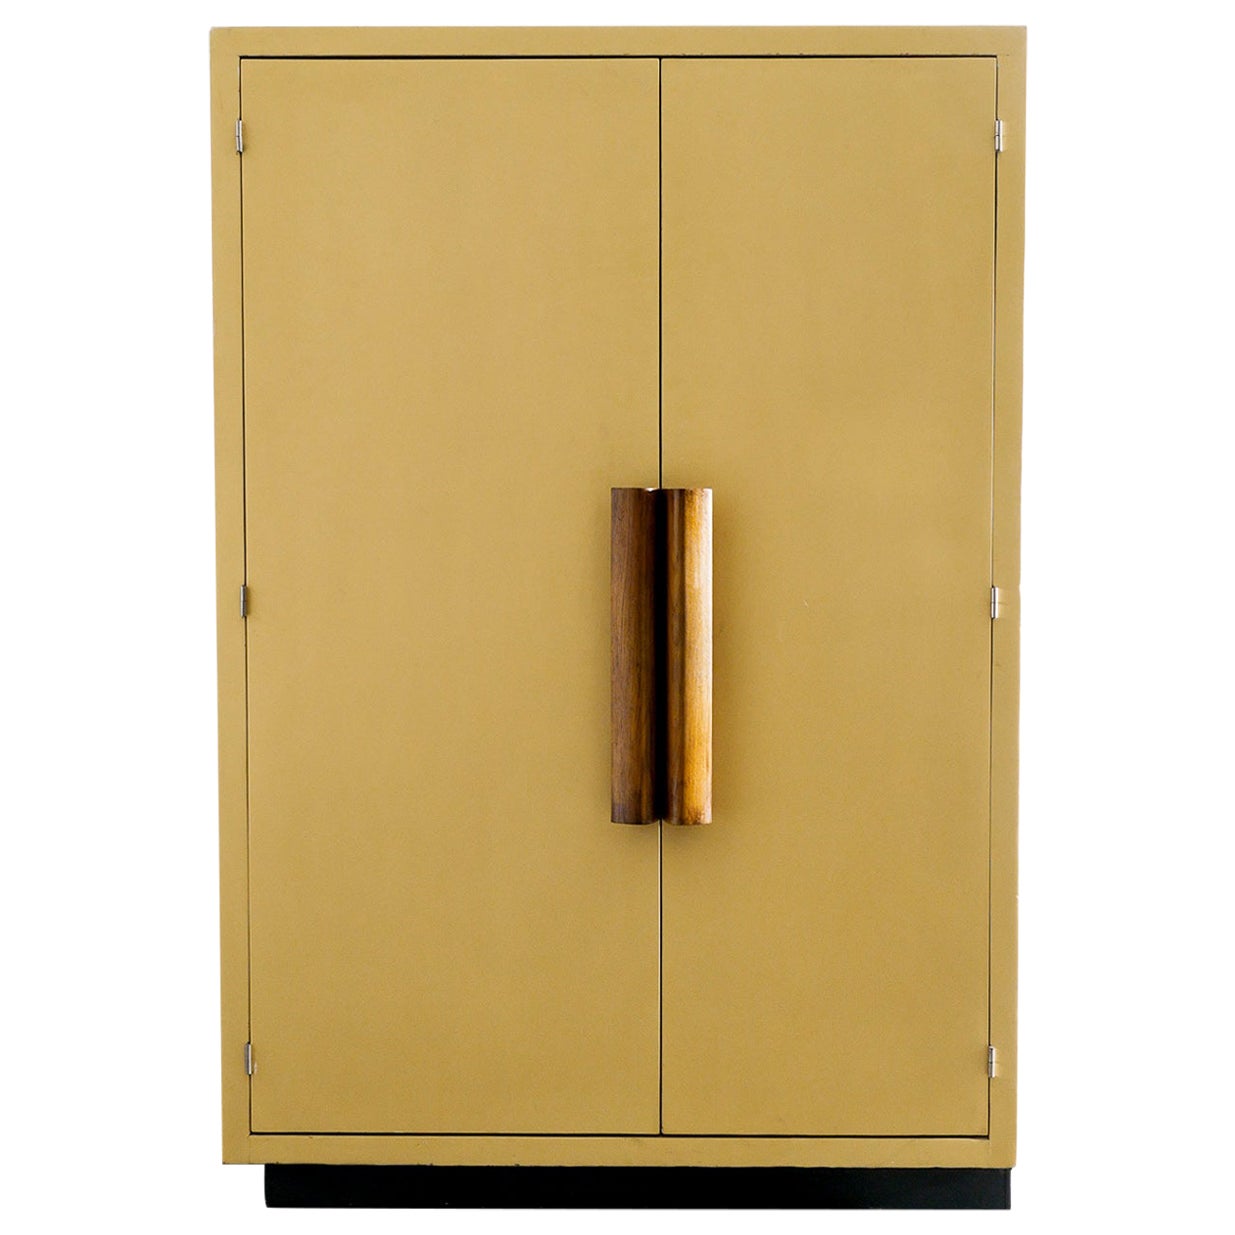 Le Corbusier Wooden Midcentury Dresser / Wardrobe Produced in Marseille, 1949 For Sale